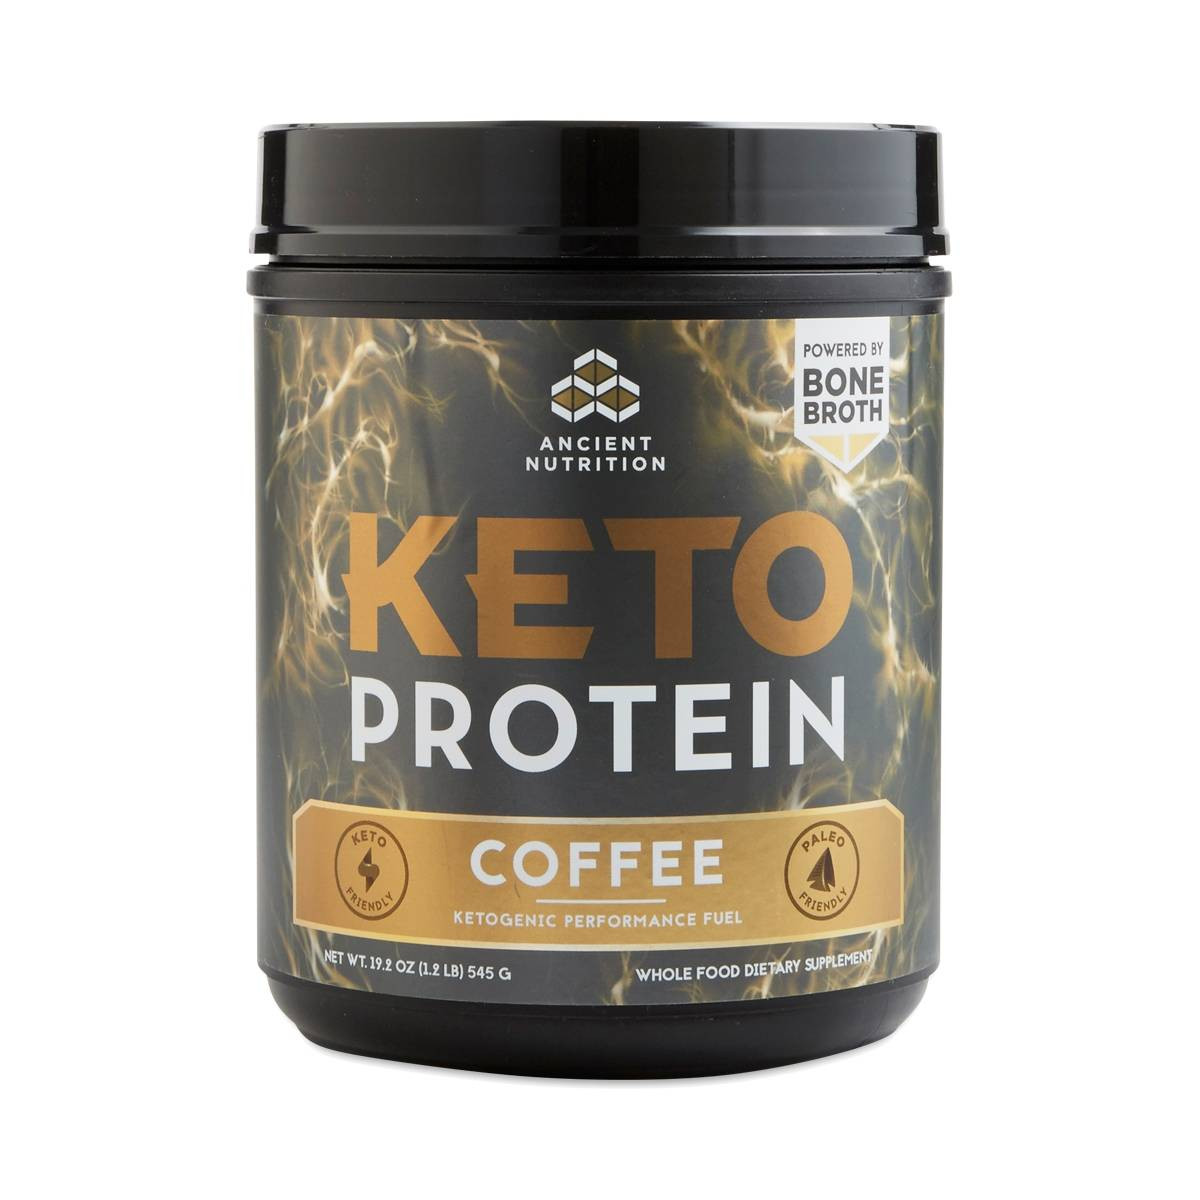 Keto Diet Coffee
 Keto PROTEIN Coffee by Ancient Nutrition Thrive Market